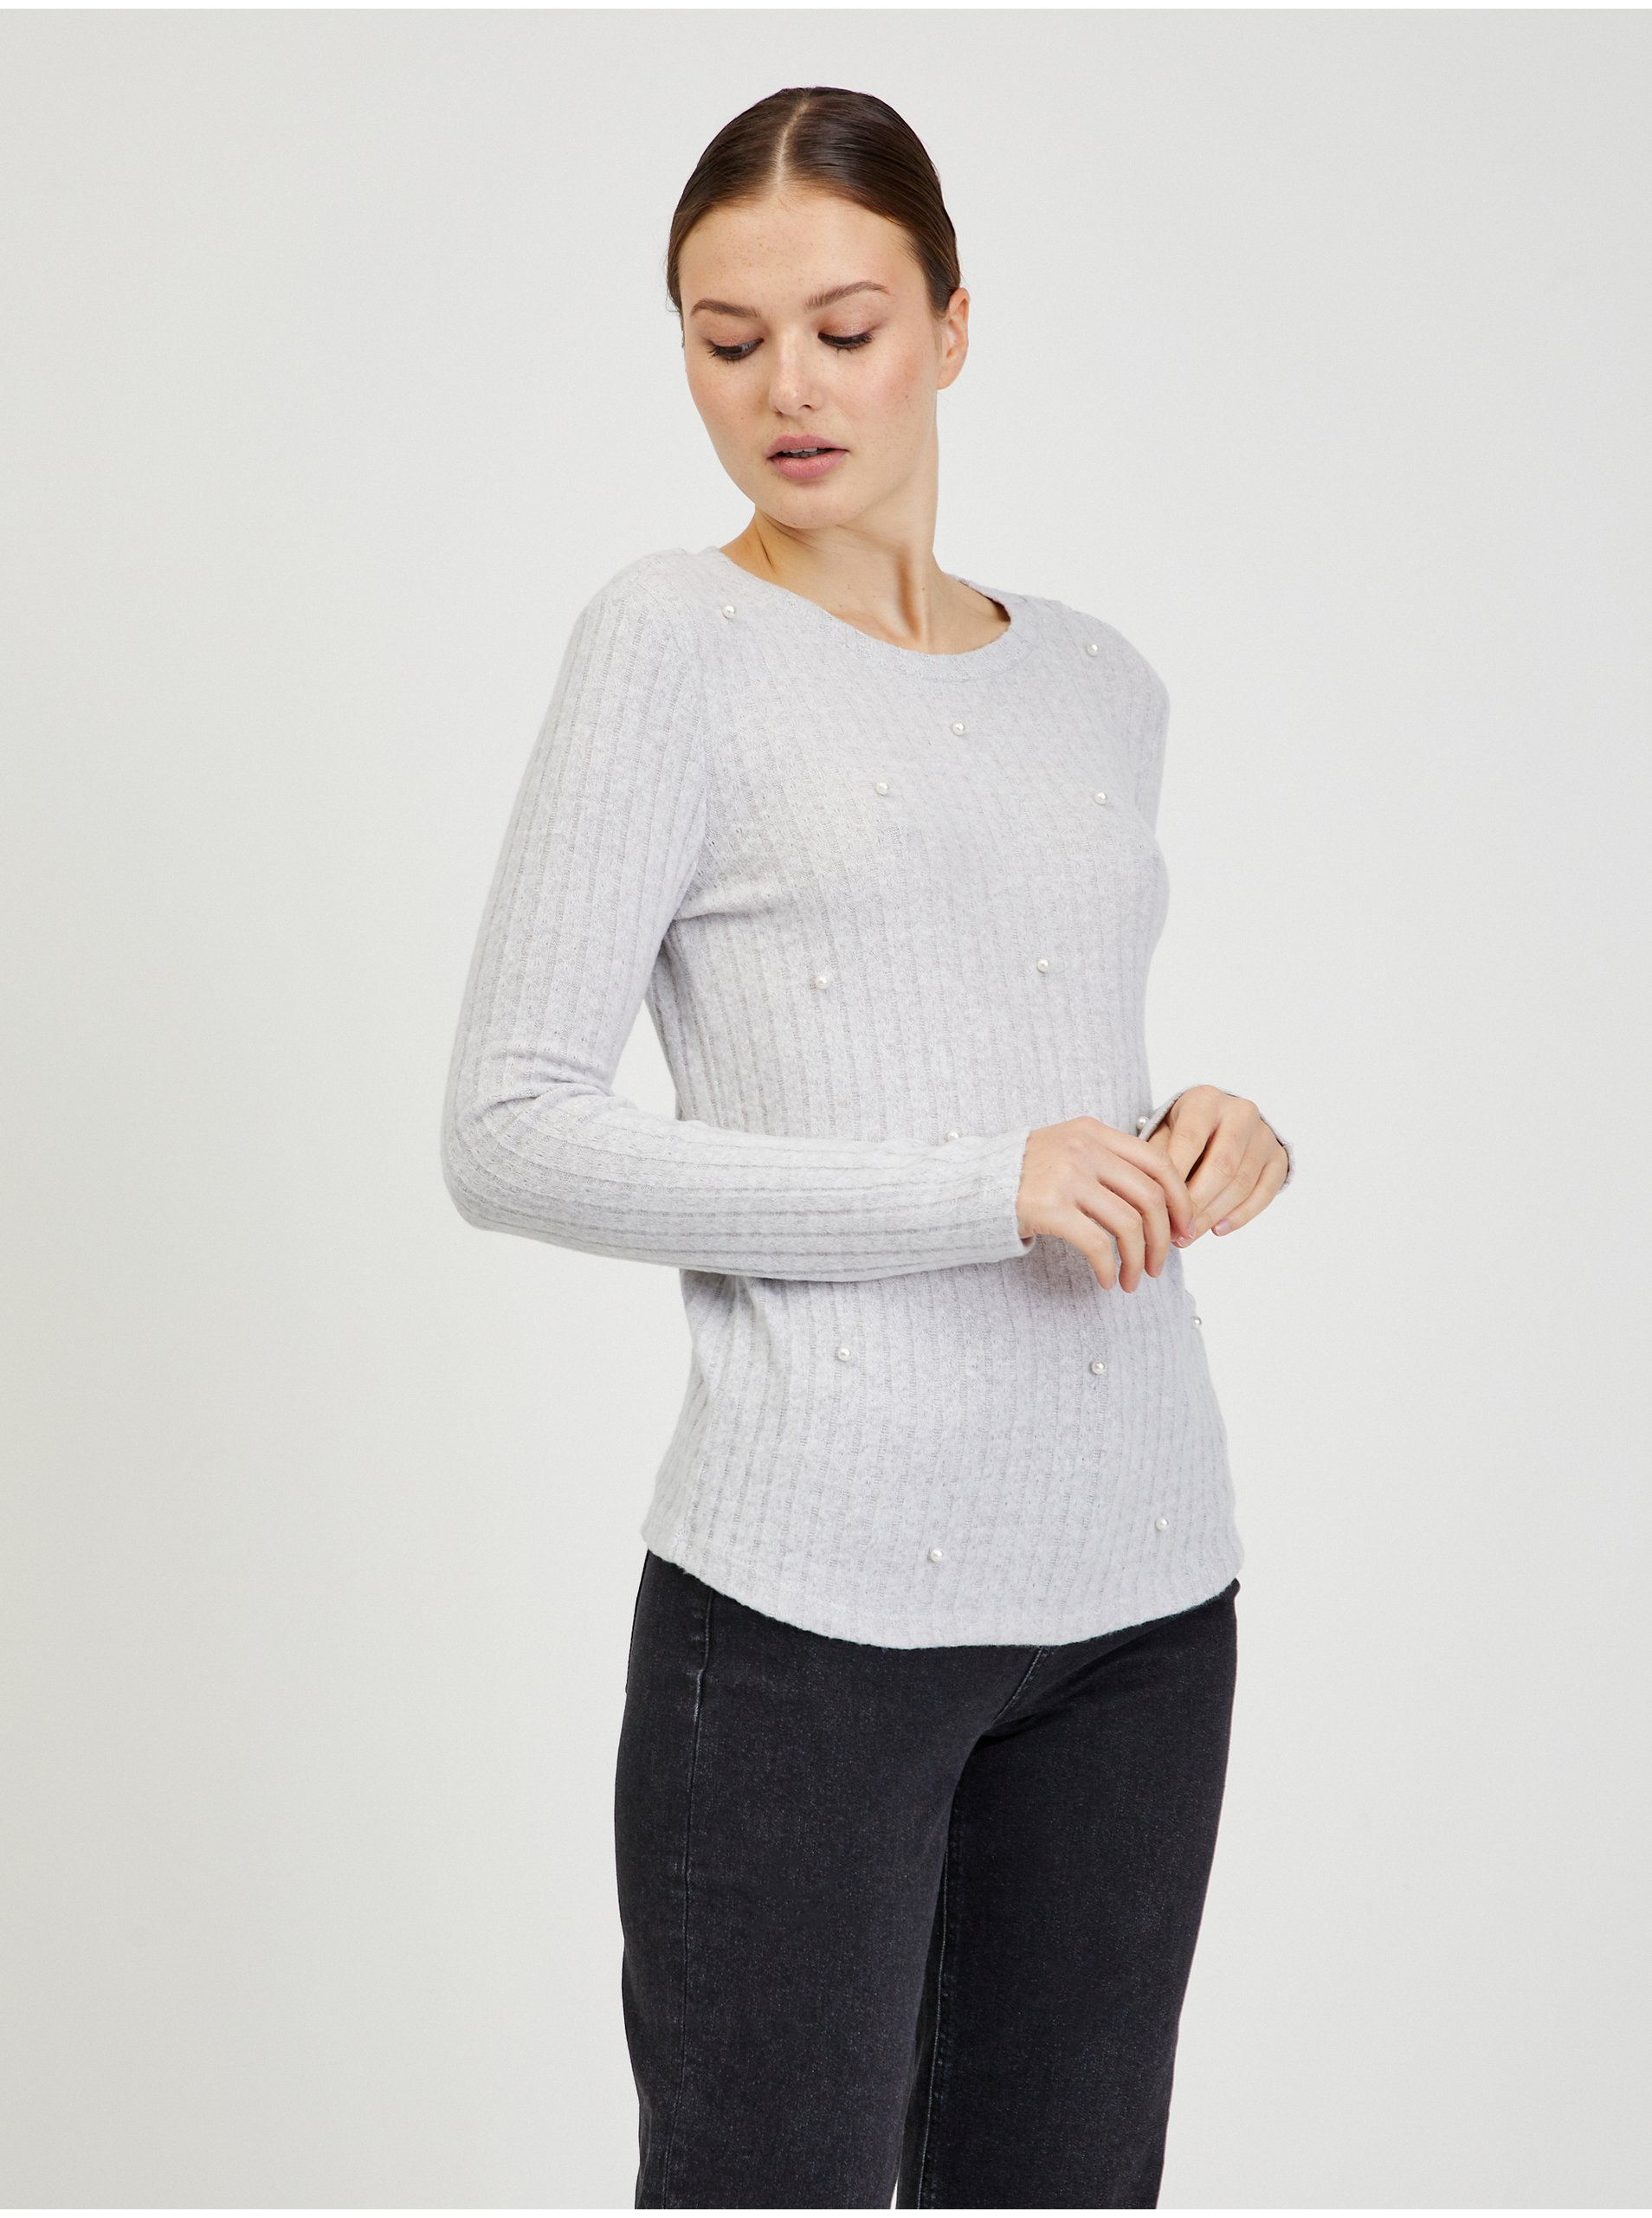 Light gray women's ribbed sweater ORSAY - Ladies akció-orsay 1